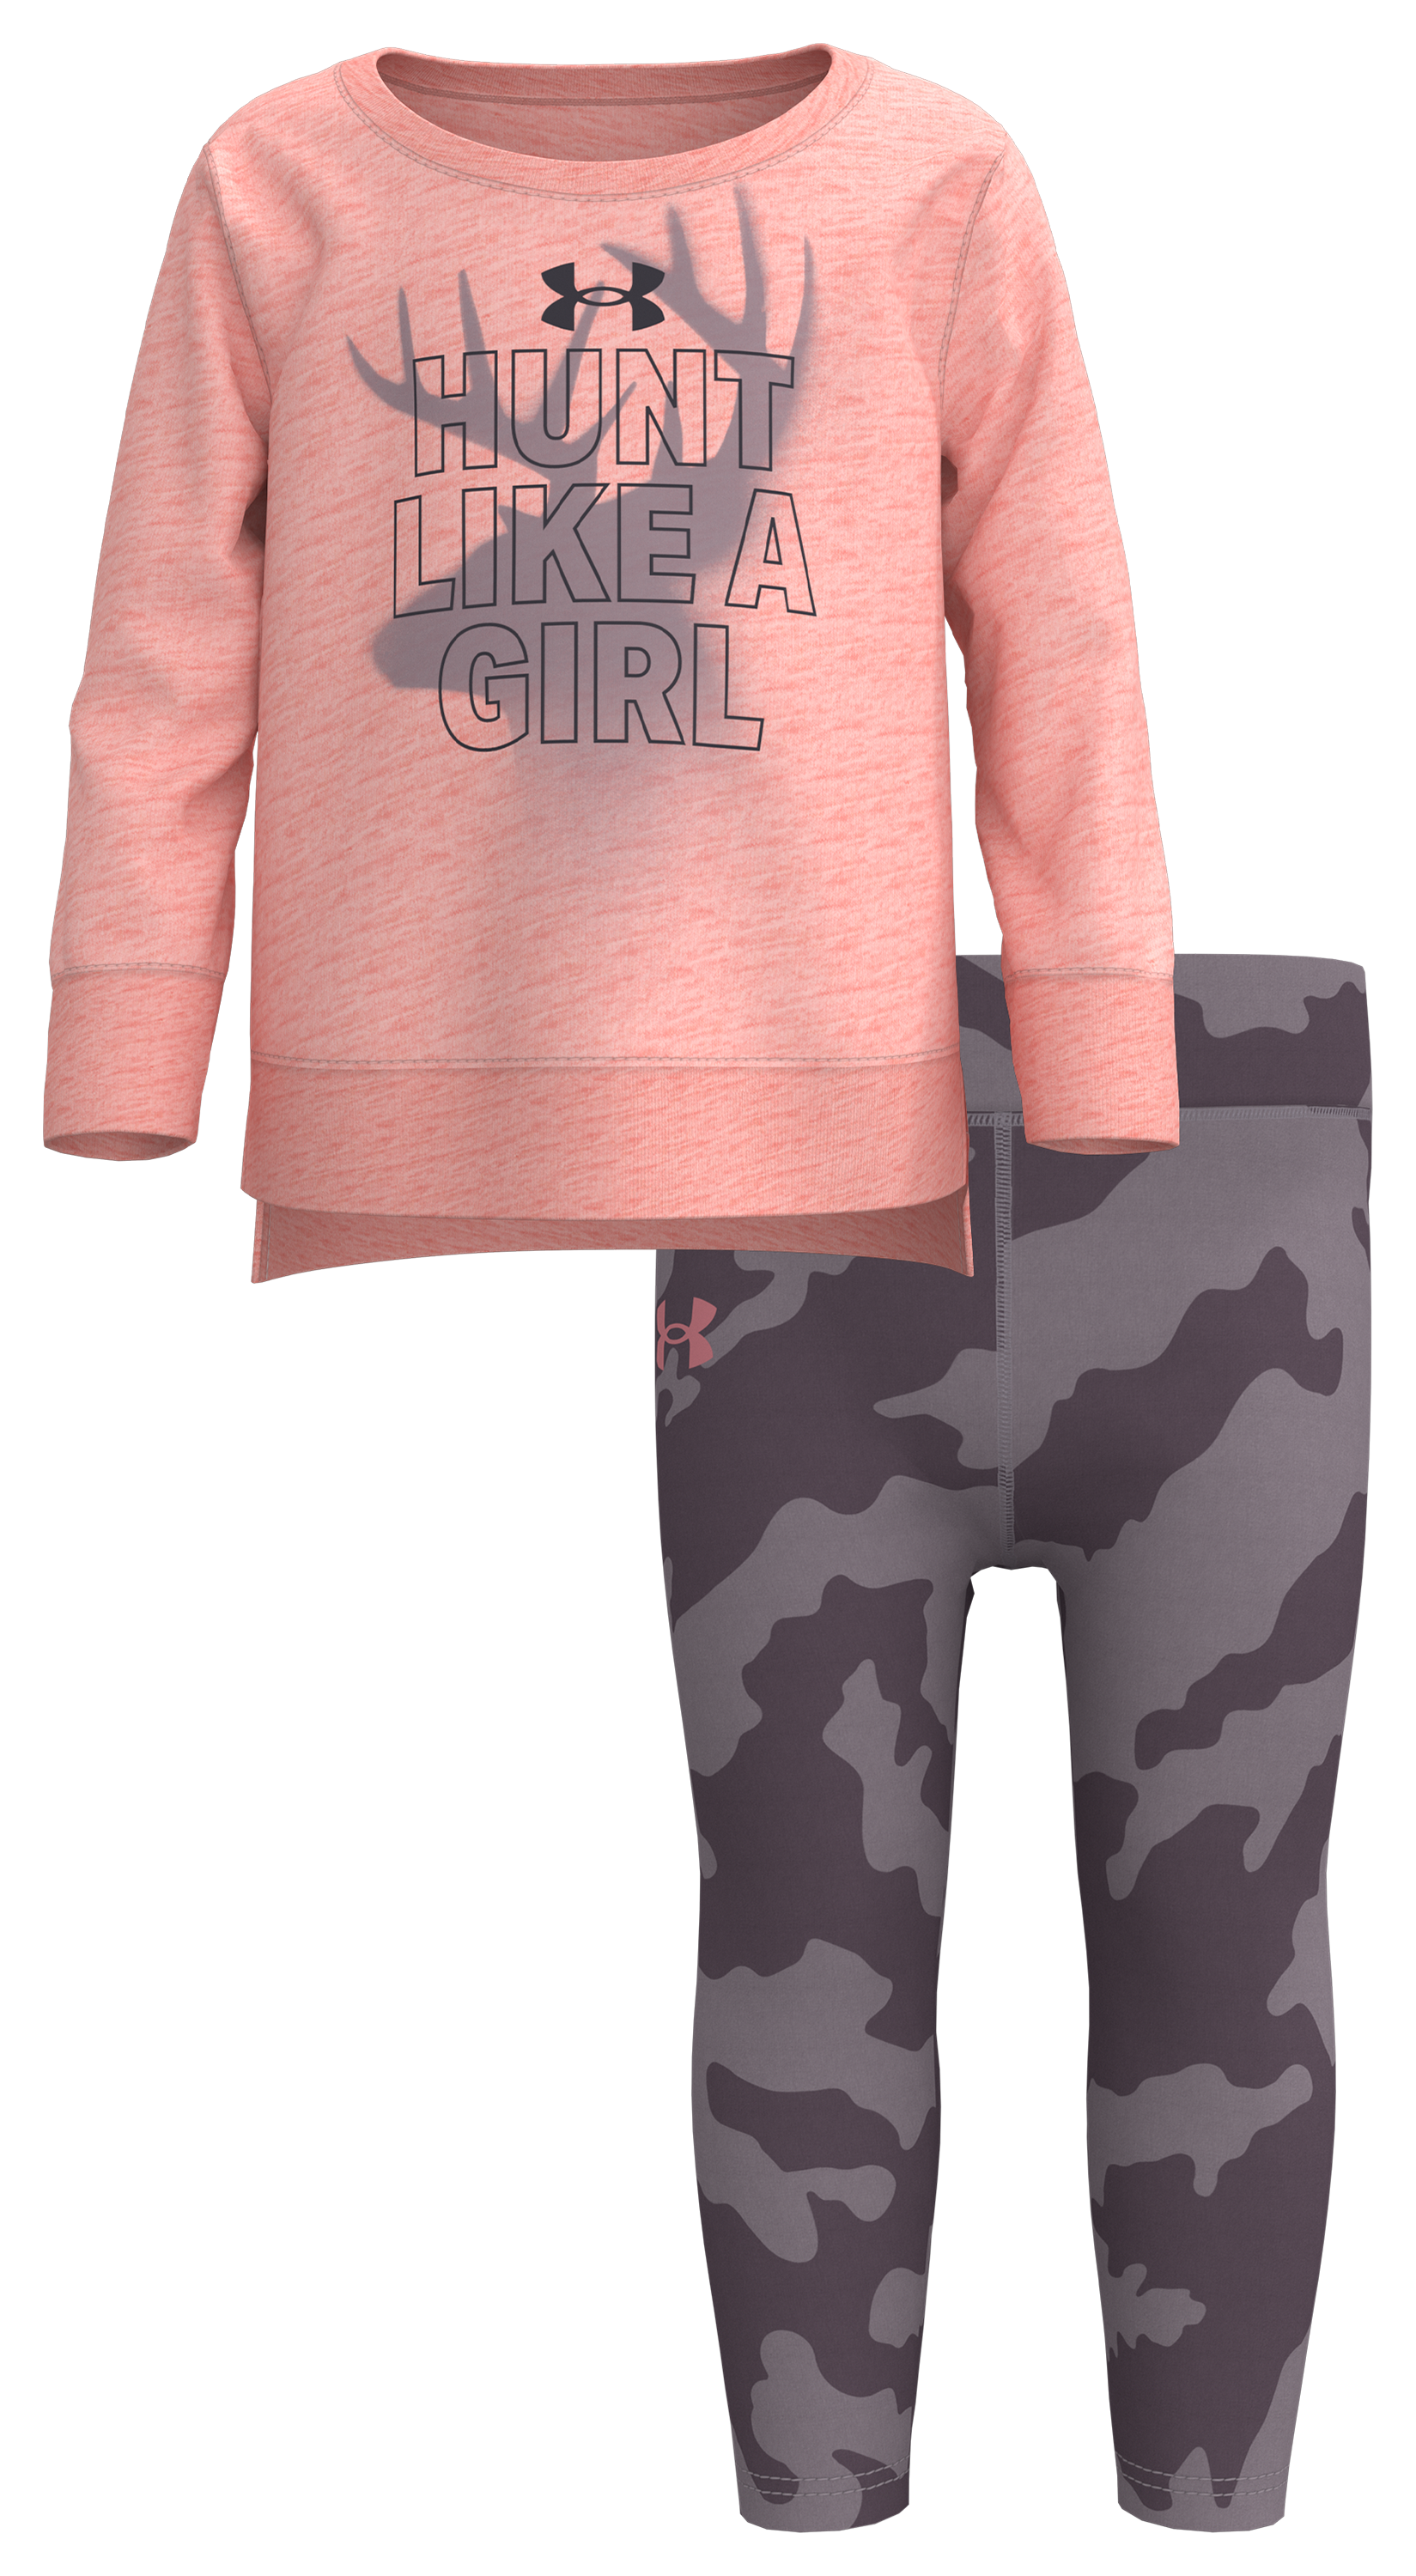 Under Armour Hunt Like a Girl Long-Sleeve Crew-Neck Top and Pants Set for Baby Girls - Powder Pink/Slate Purple - 0-3 Months